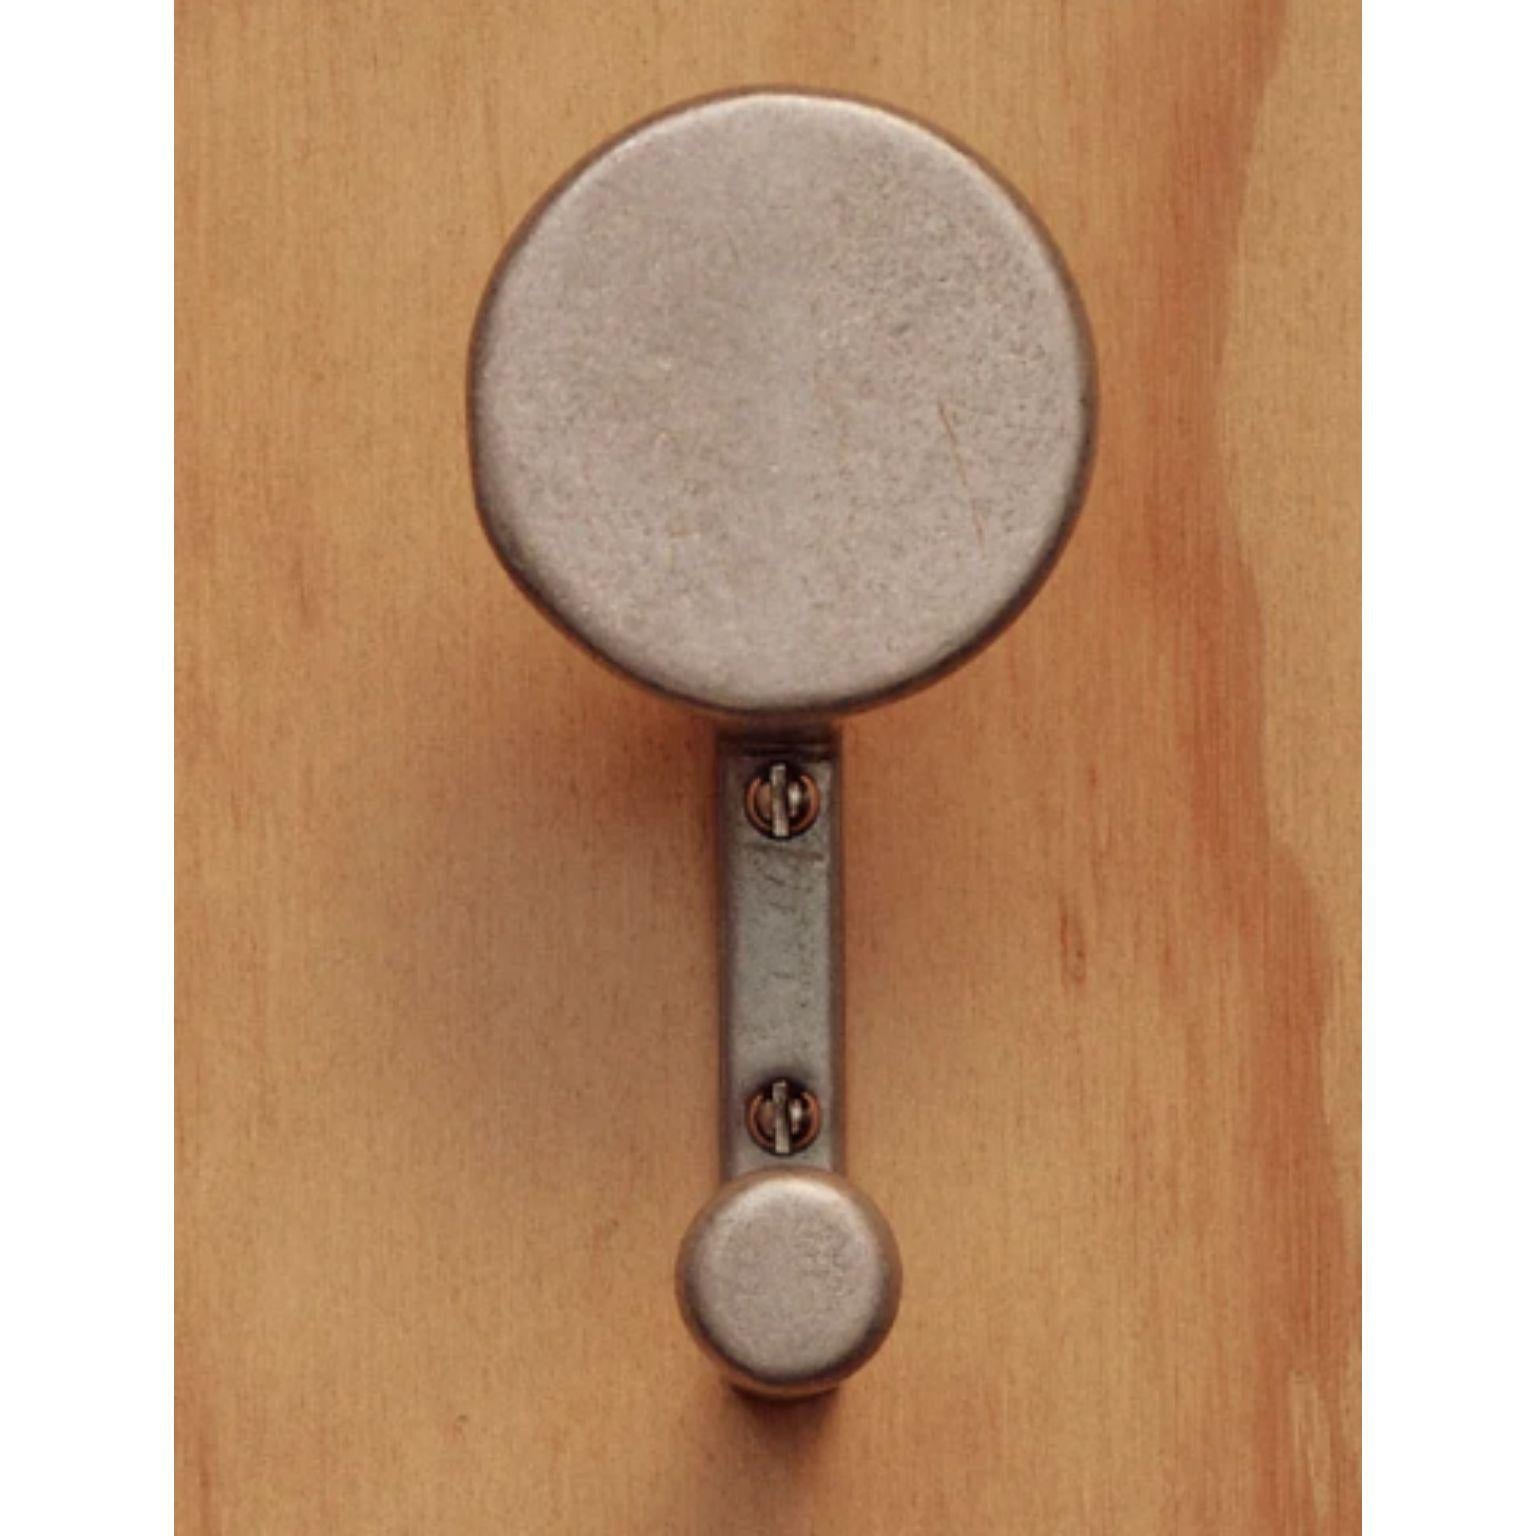 F.ACE Aluminium Wall Hook by Henry Wilson
Dimensions: W 6 x D 5 x H 10 cm
Materials: Aluminium 

The F.ACE Hook is a riff on our popular compass Hook. It is sand cast in solid Aluminium and features a full disc for the main hanging point.